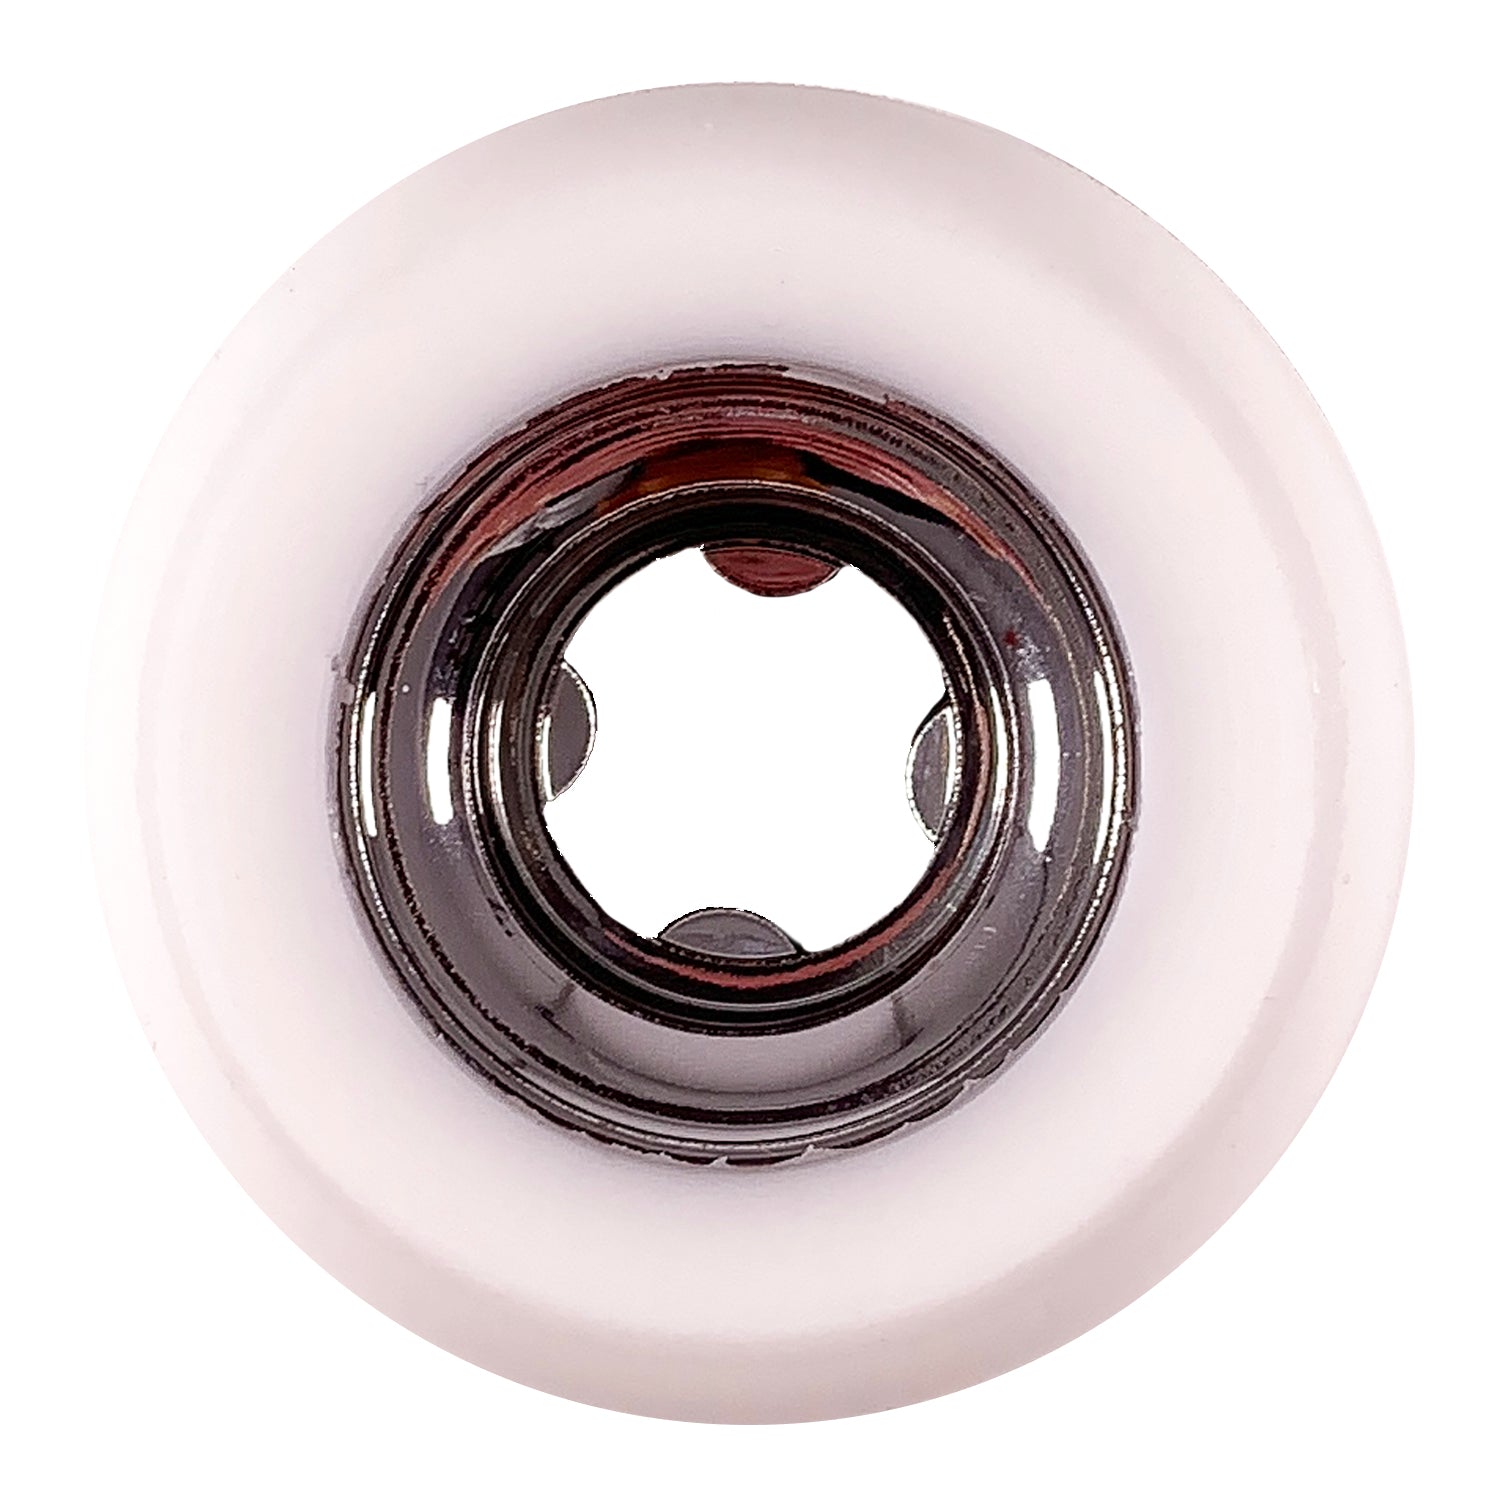 Ricta Wheels - 54mm - Chrome Clouds 92a - White / Black - Prime Delux Store